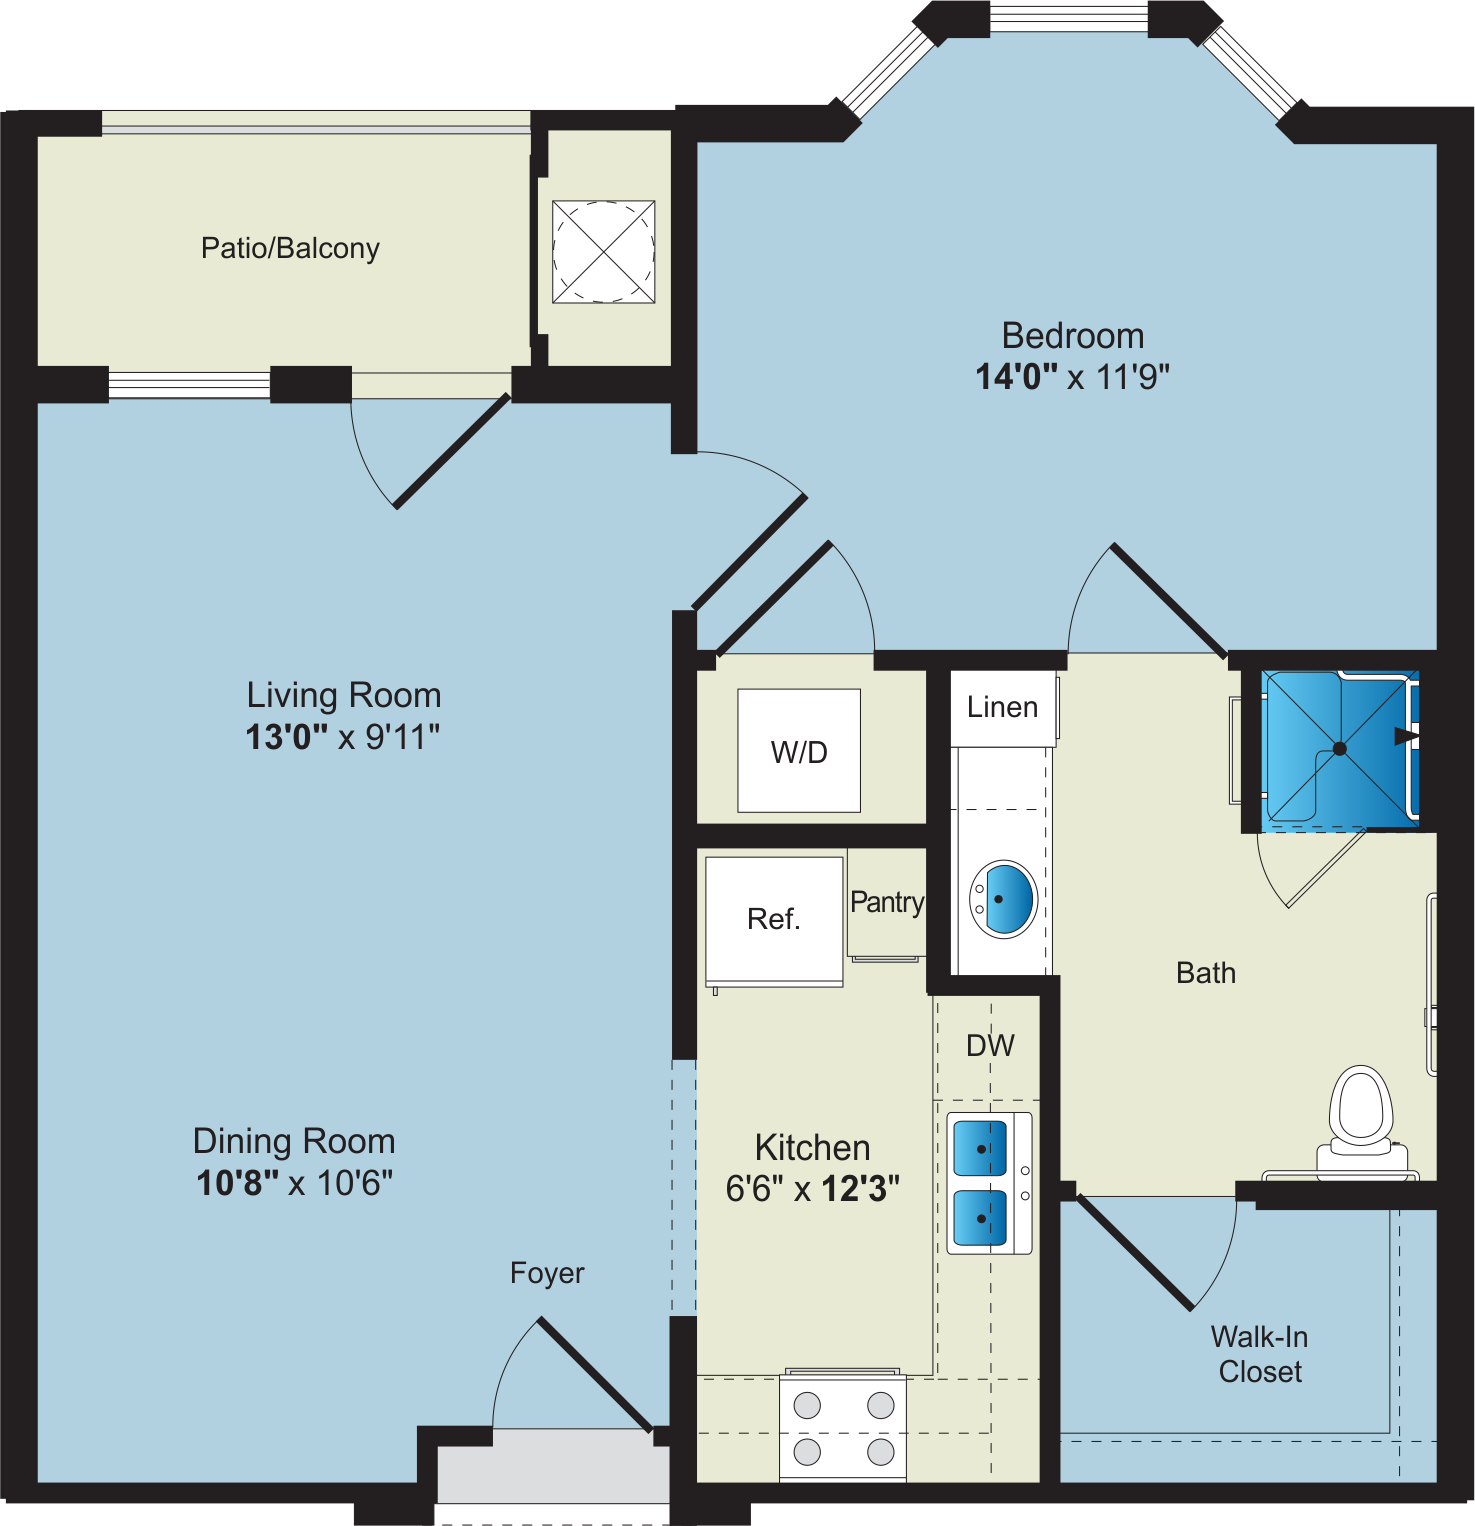 A floor plan for a one bedroom apartment available for Apartment Rentals.